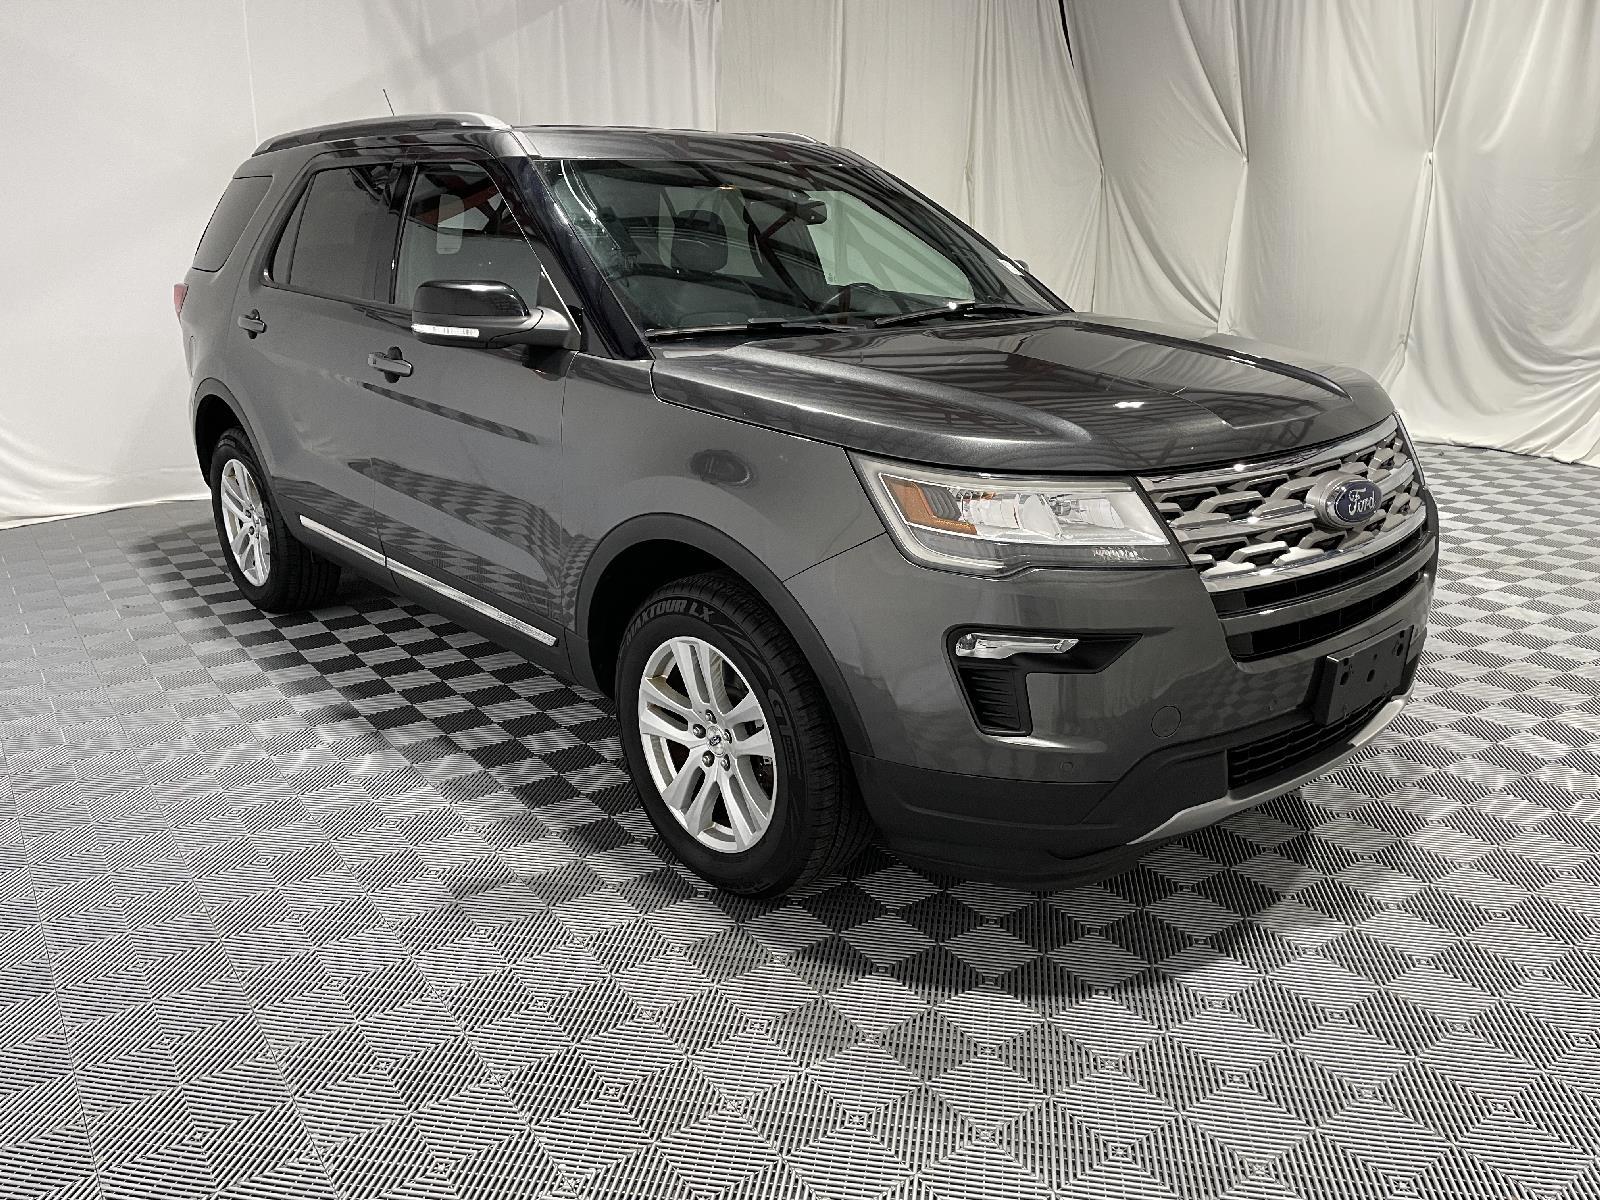 Used 2018 Ford Explorer XLT SUV for sale in St Joseph MO